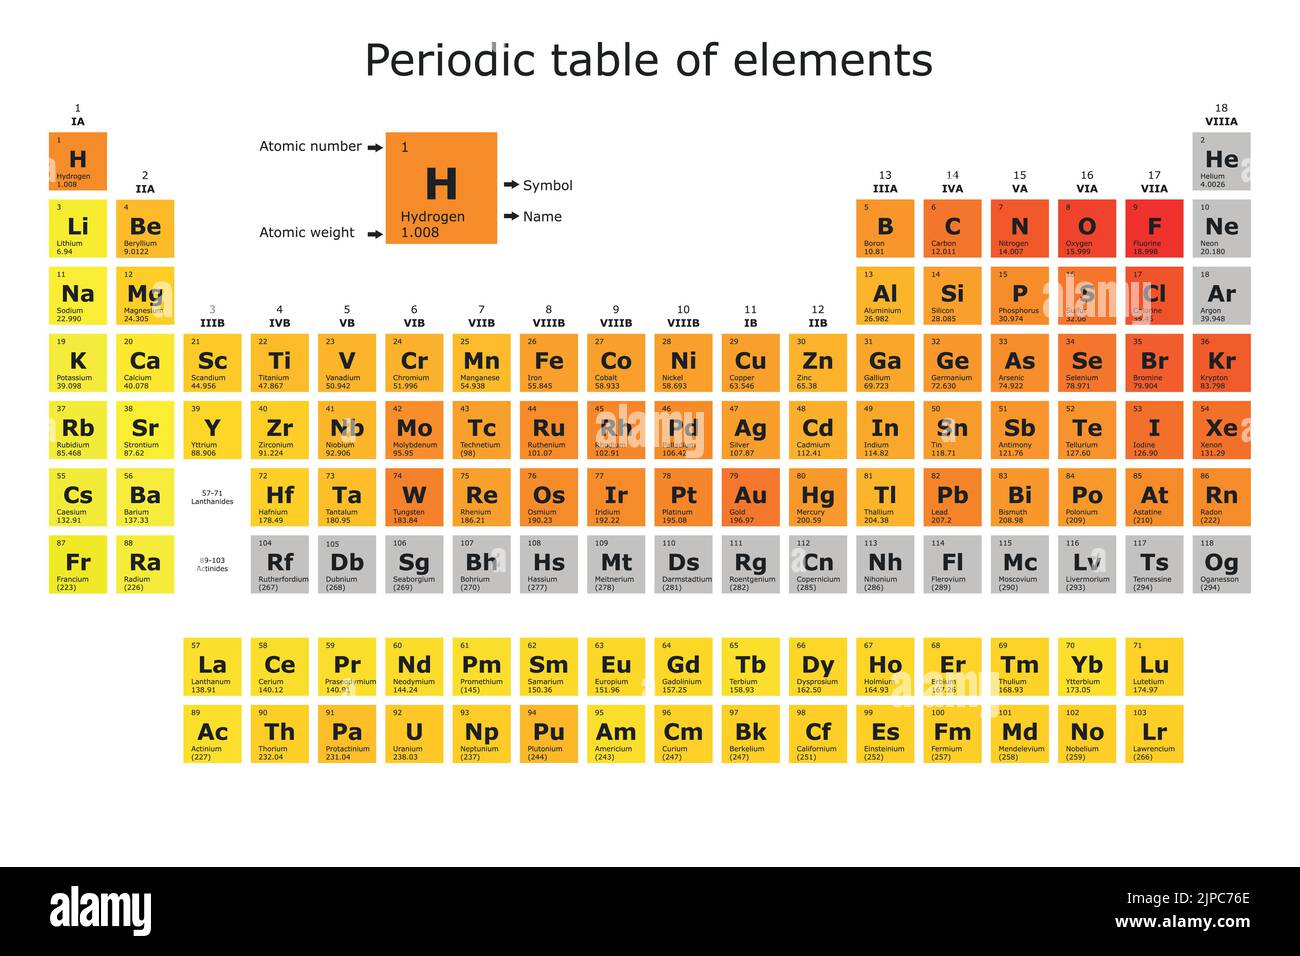 Lit element. Chemical elements with Atomic number and symbols.